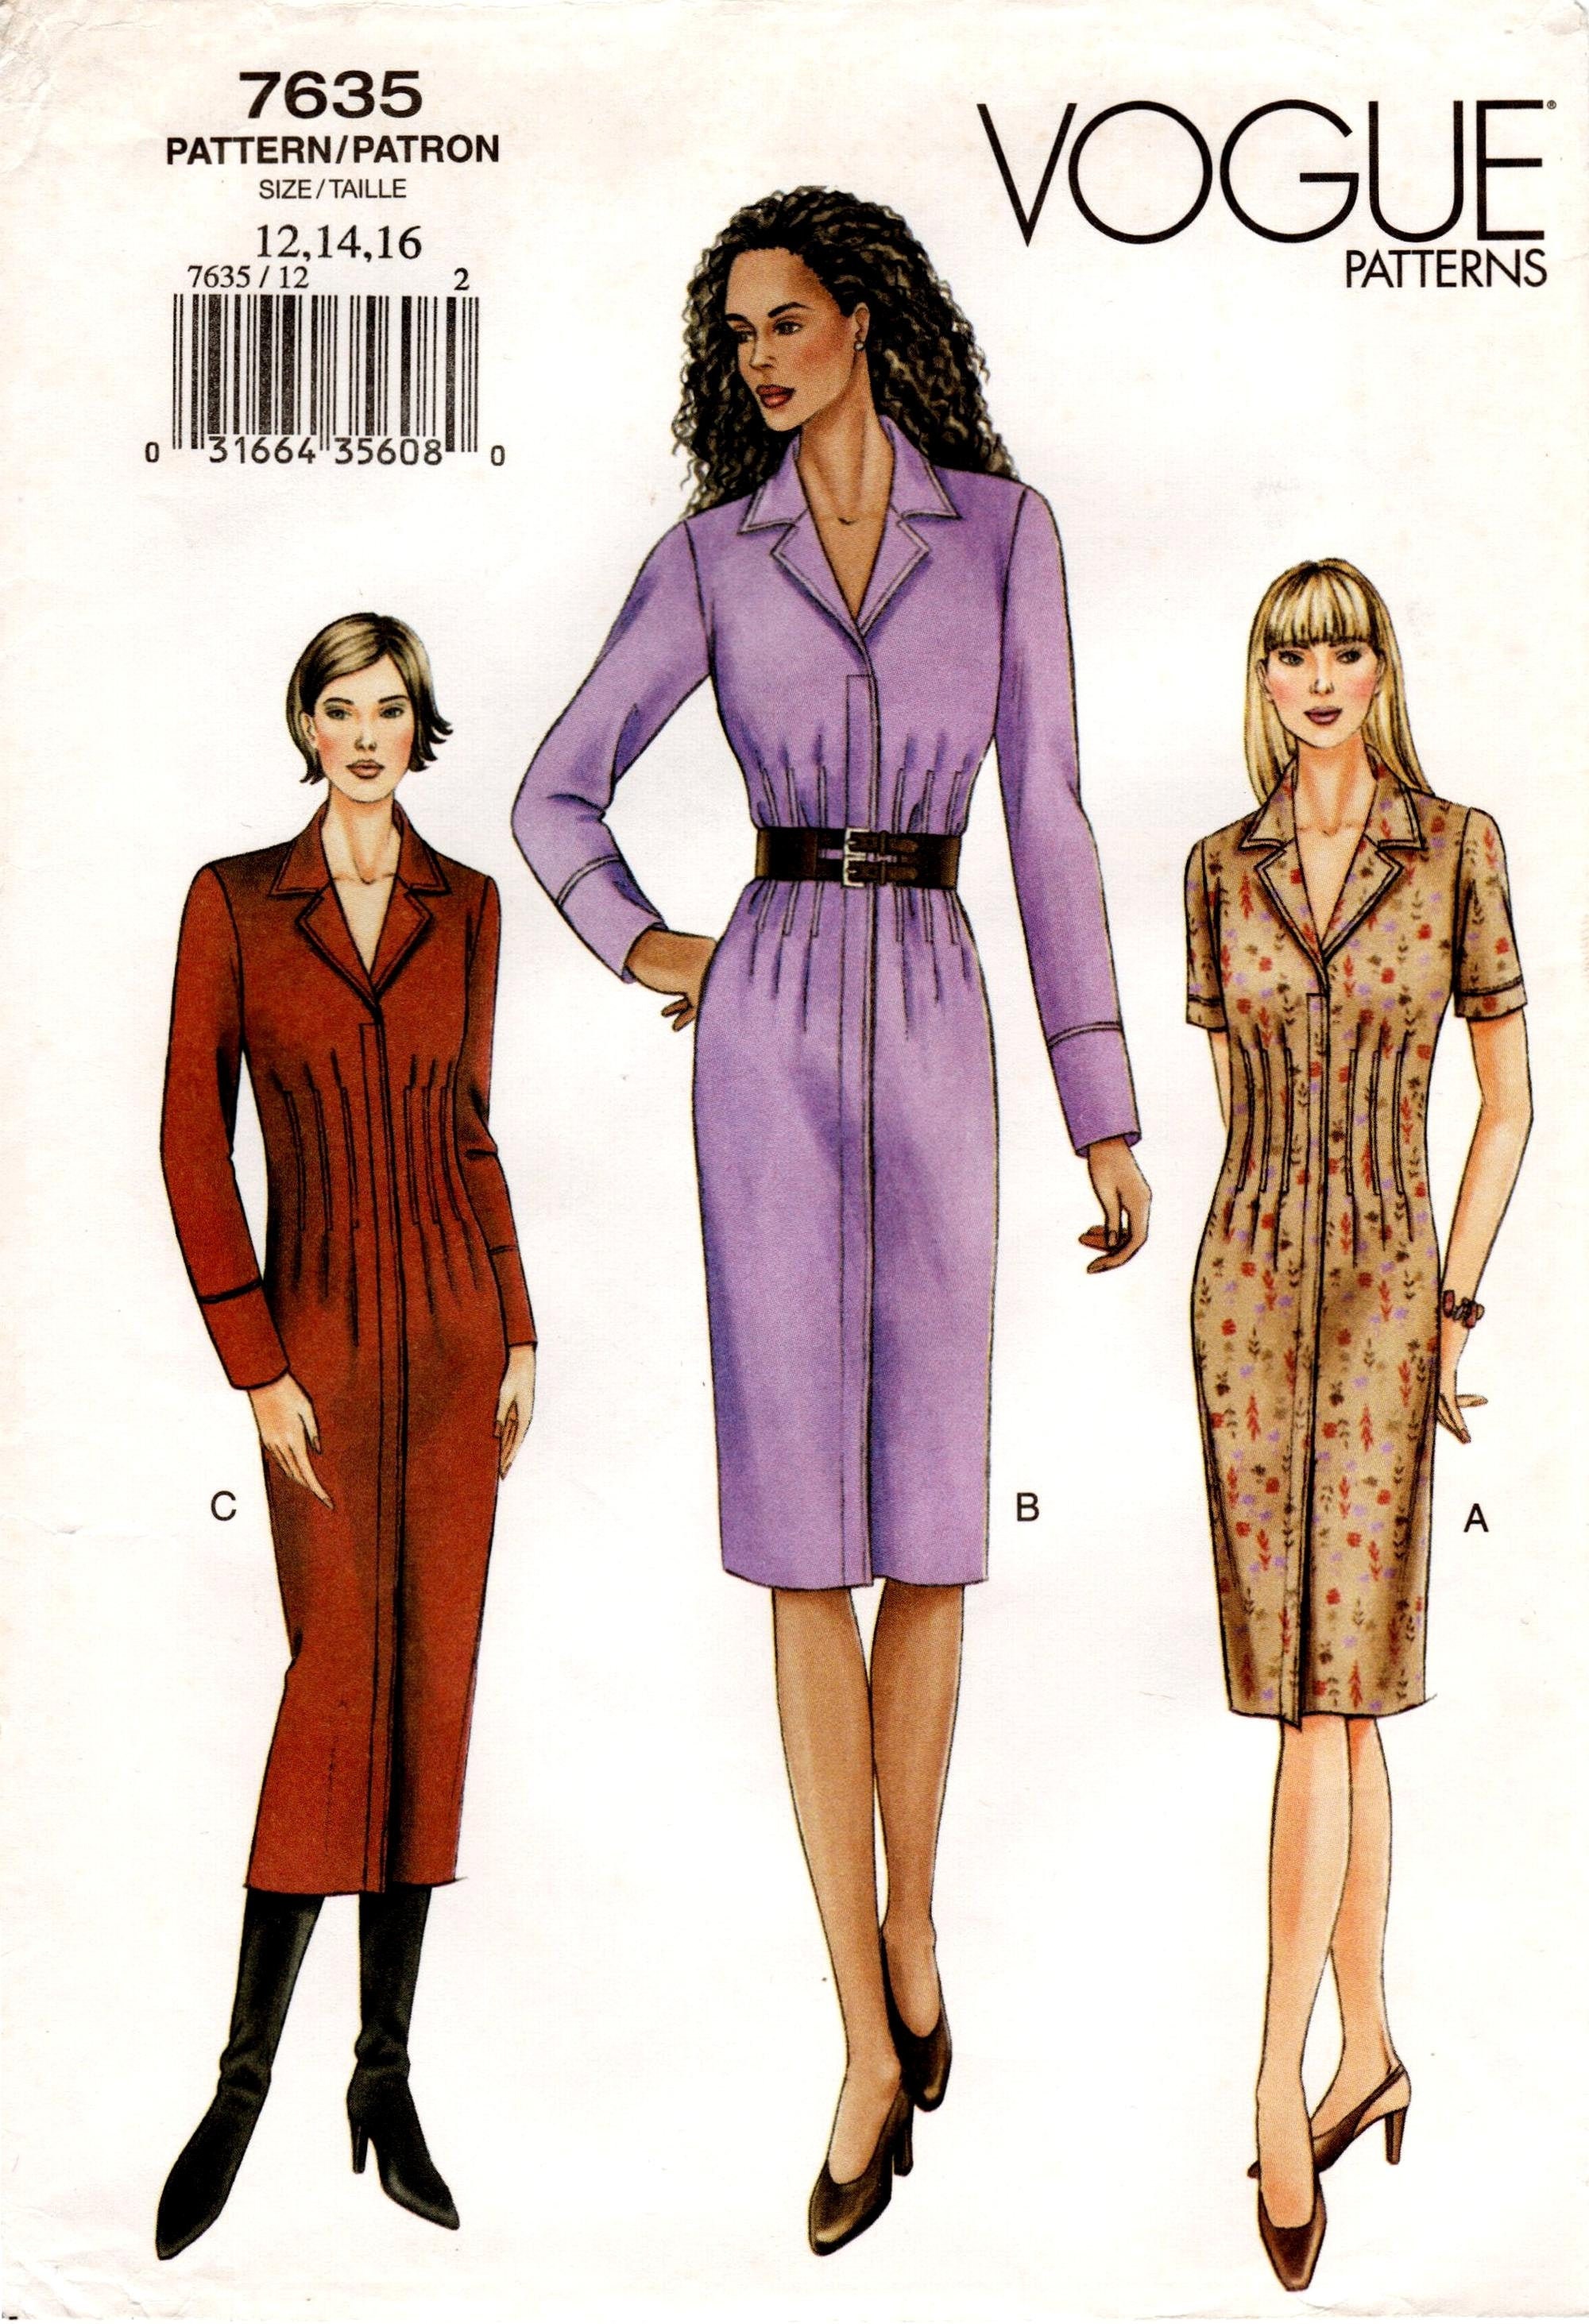 90s Vogue Sewing Pattern 7140 Straight or A-Line Dress Size 14-16-18